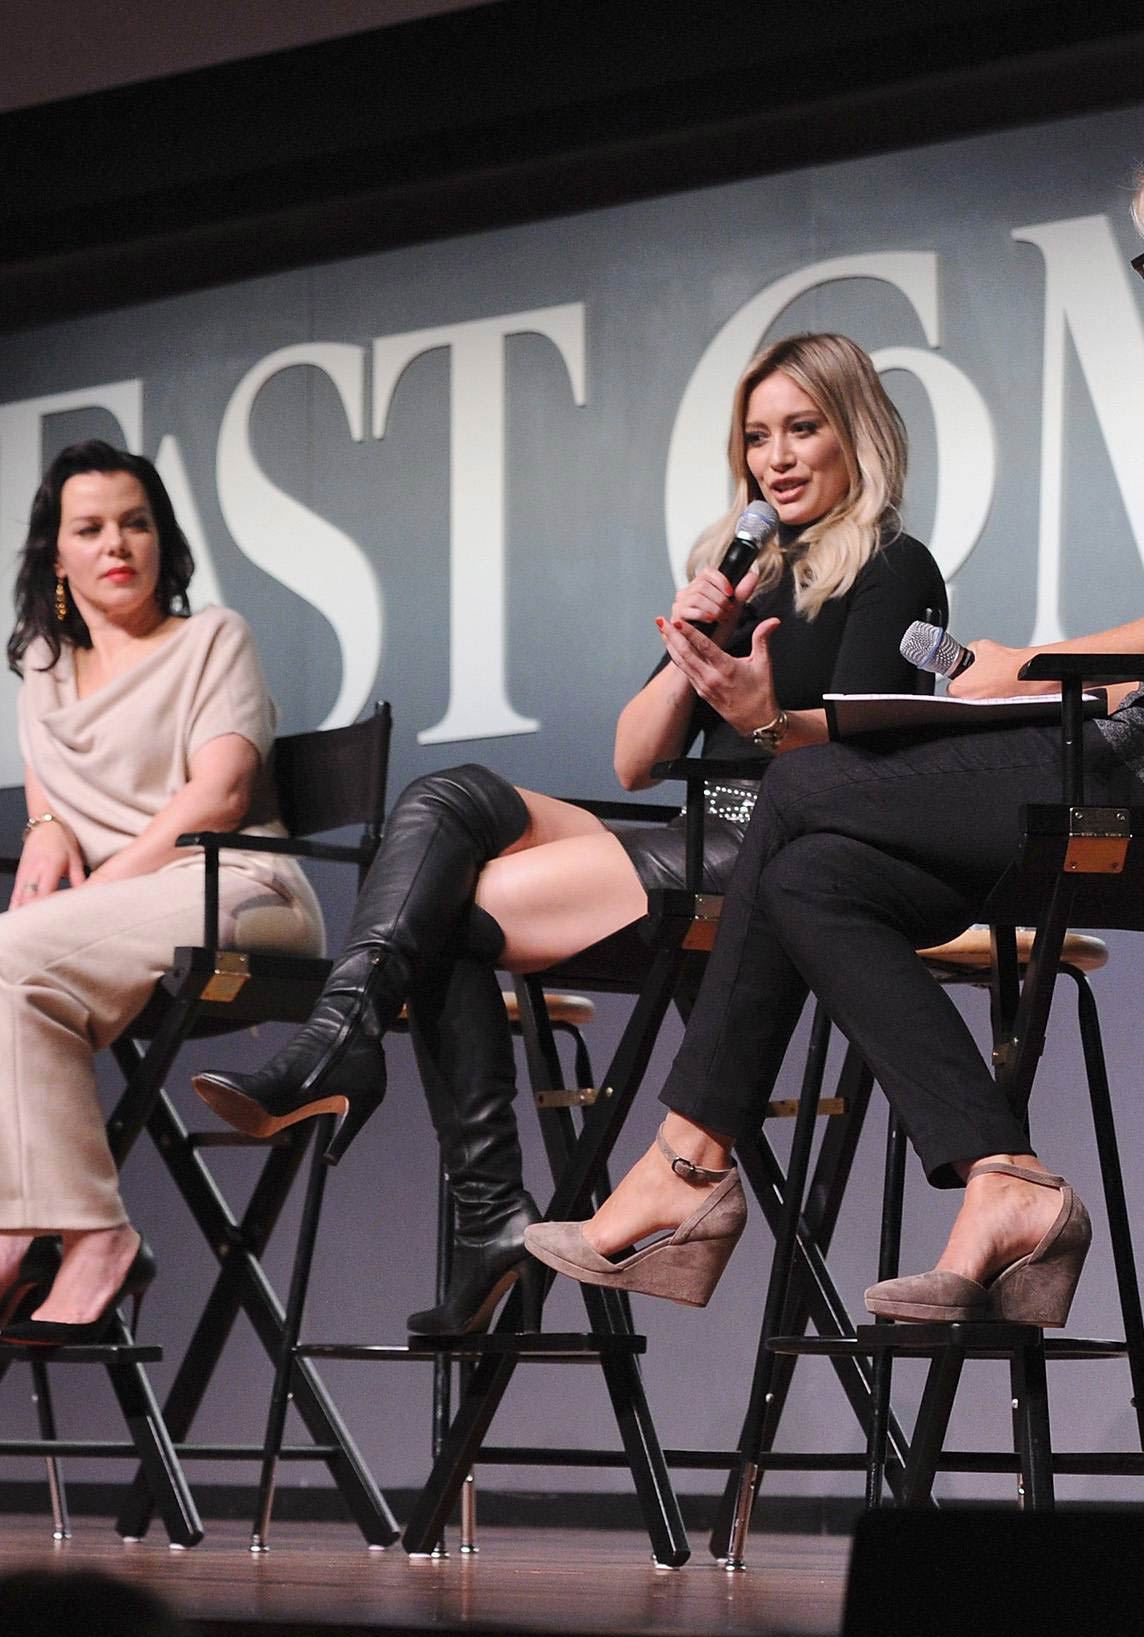 Hilary Duff attemds The Fast Company Innovation Festival Inside TV Land’s Show Younger